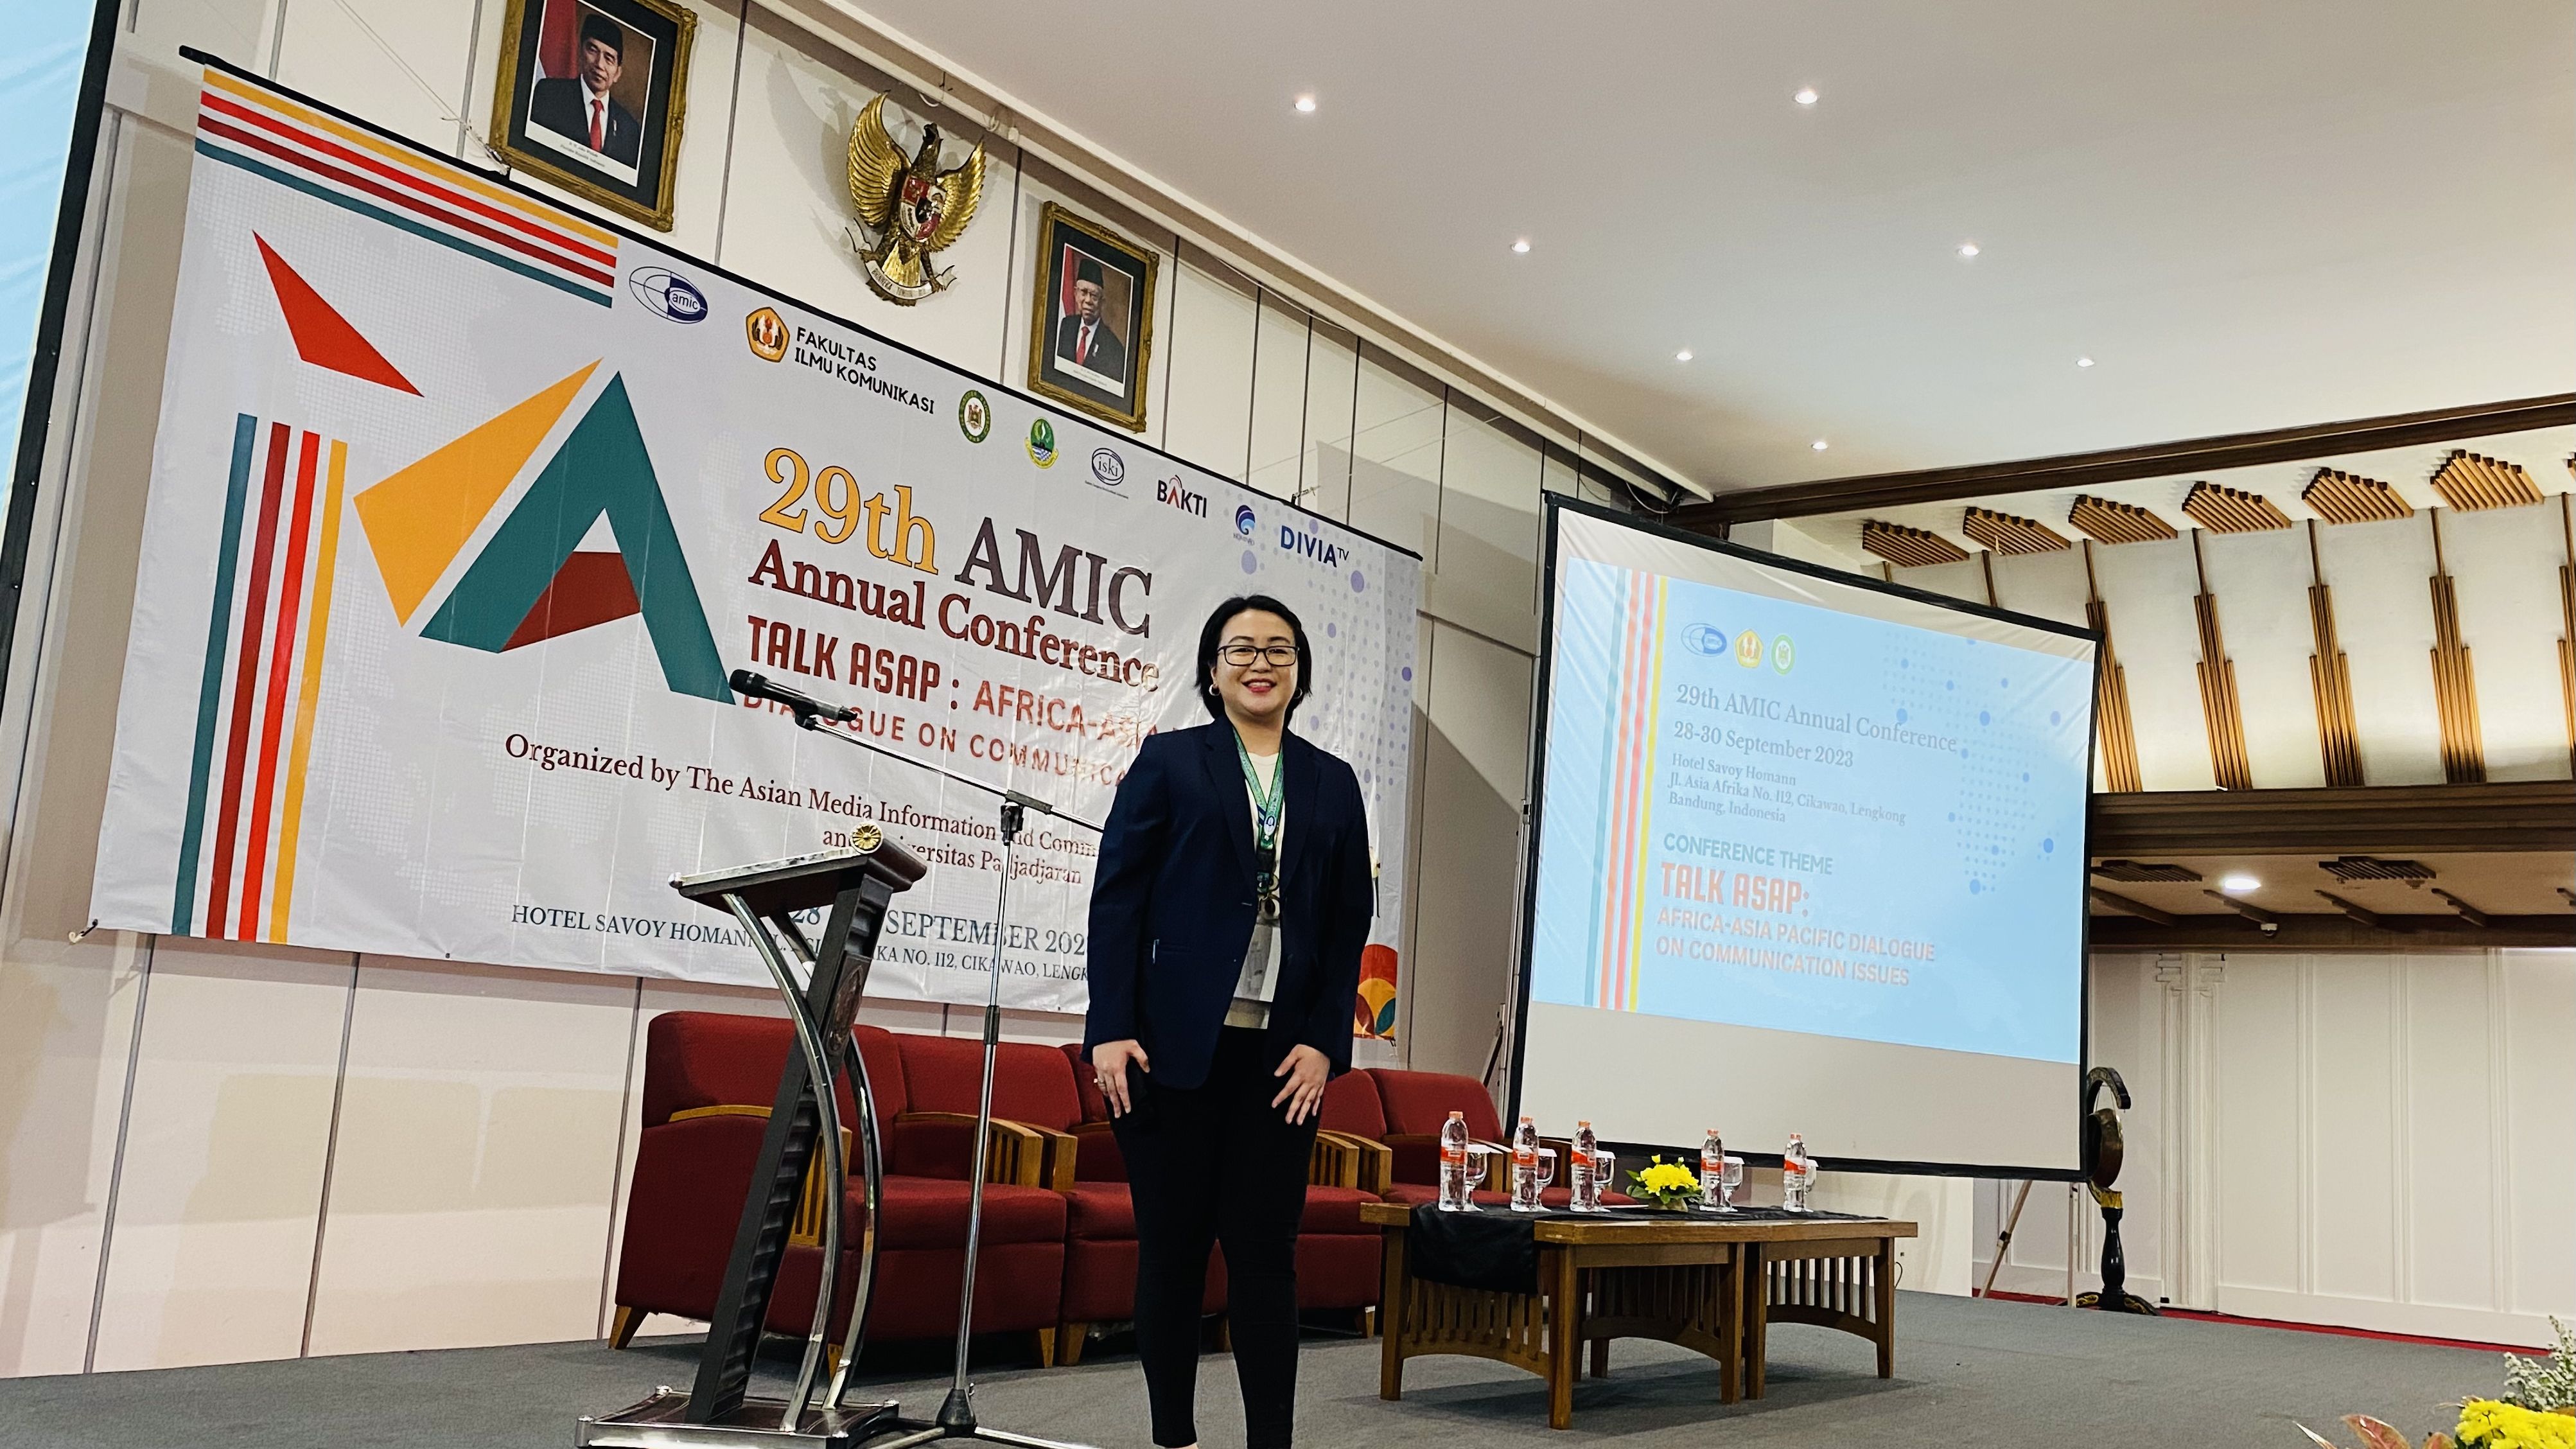 Asst. Prof. Yhna Therese P. Santos presents at 29th AMIC Annual Conference